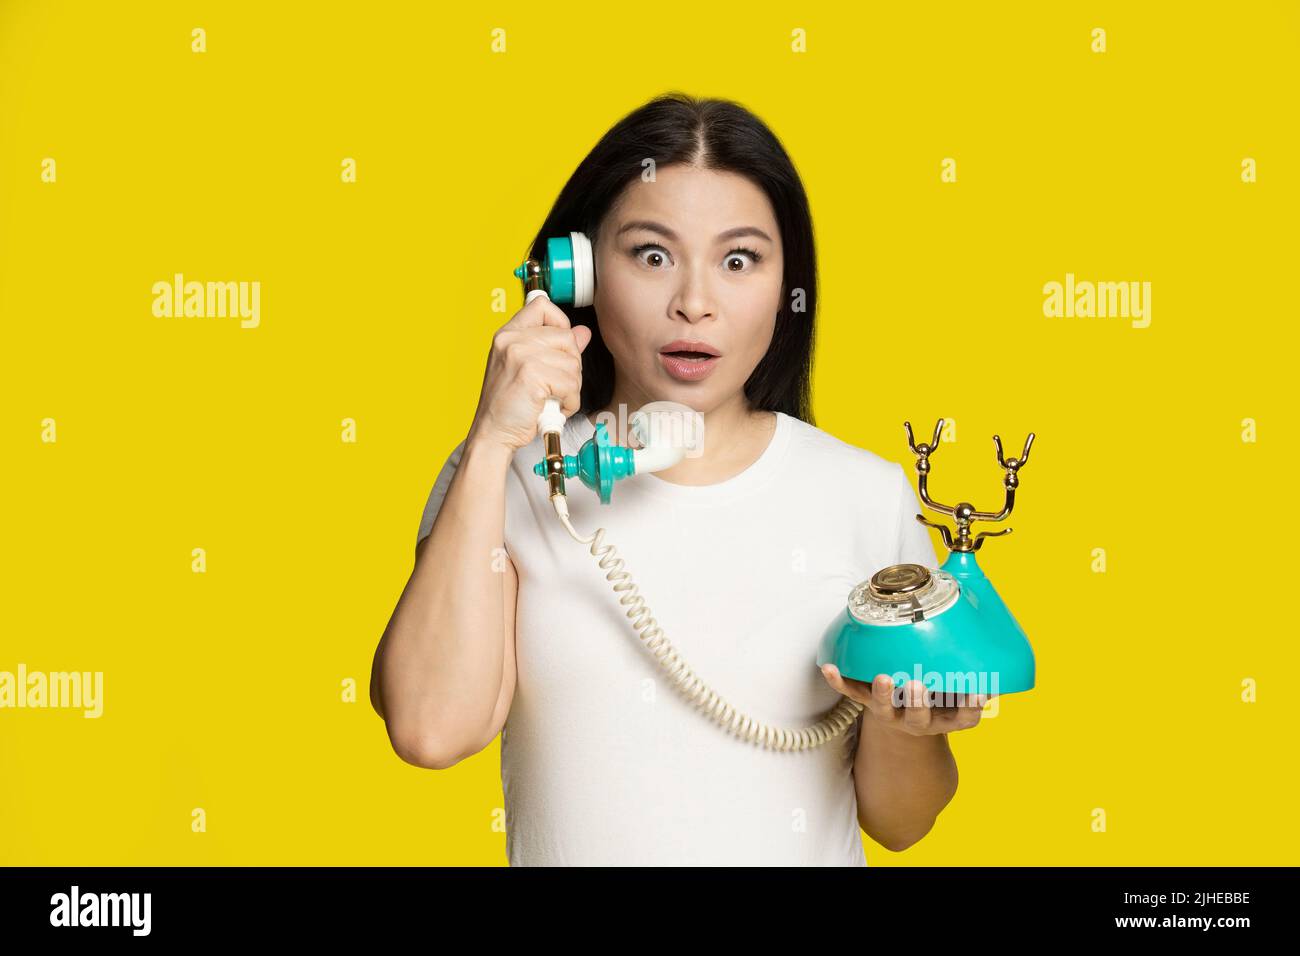 Shocked of winning lottery middle aged asian woman with vintage, retro telephone in hands excited, surprise face expression, isolated on yellow background. Communication concept.  Stock Photo